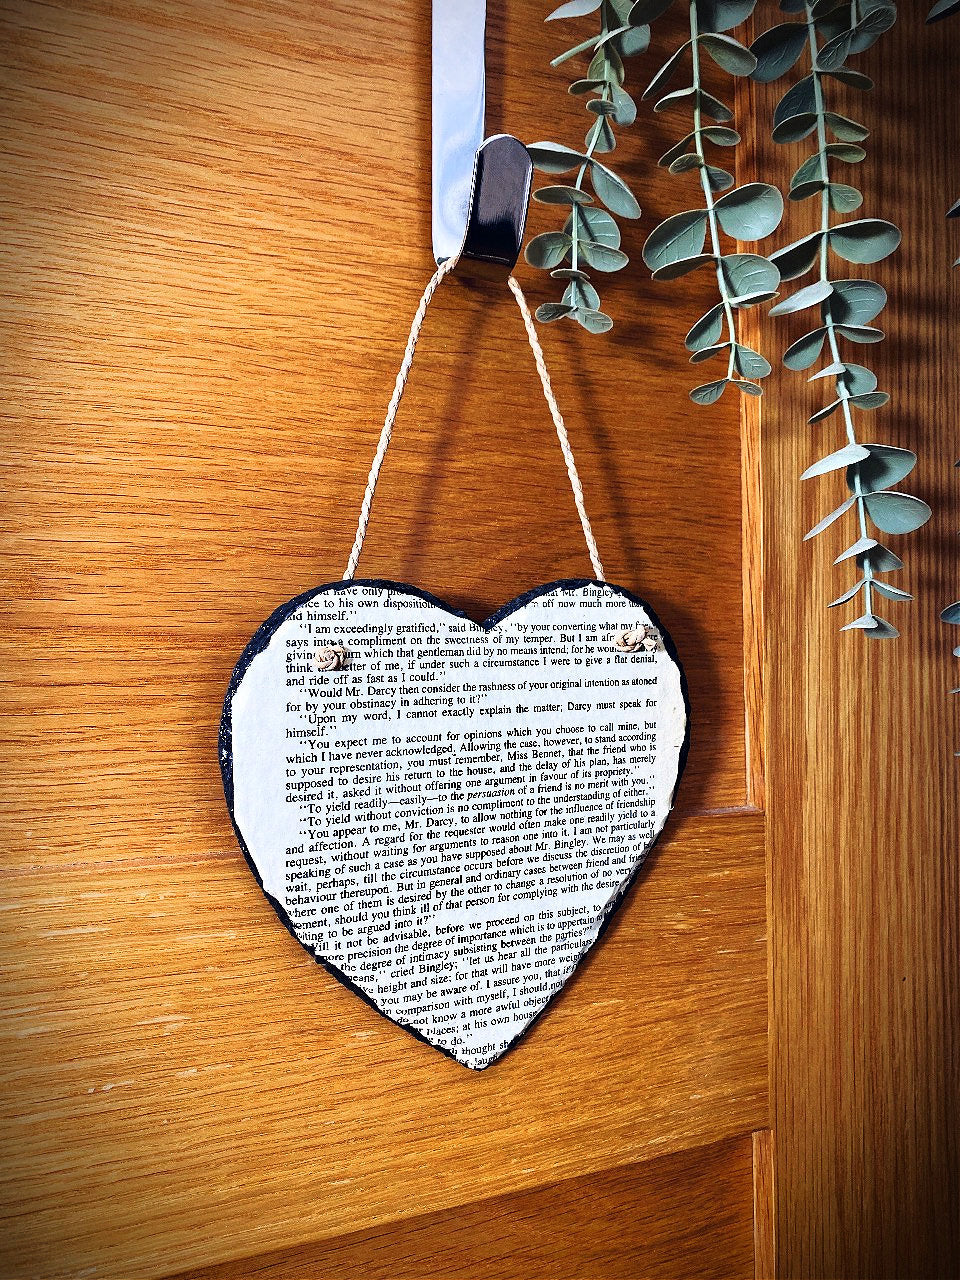 Recycled Book Page Decorative Slate Hearts. Book Lover Gift. Literature Home Decor. Upcycled Homeware. Classic Stories. Old Books. Bookworm